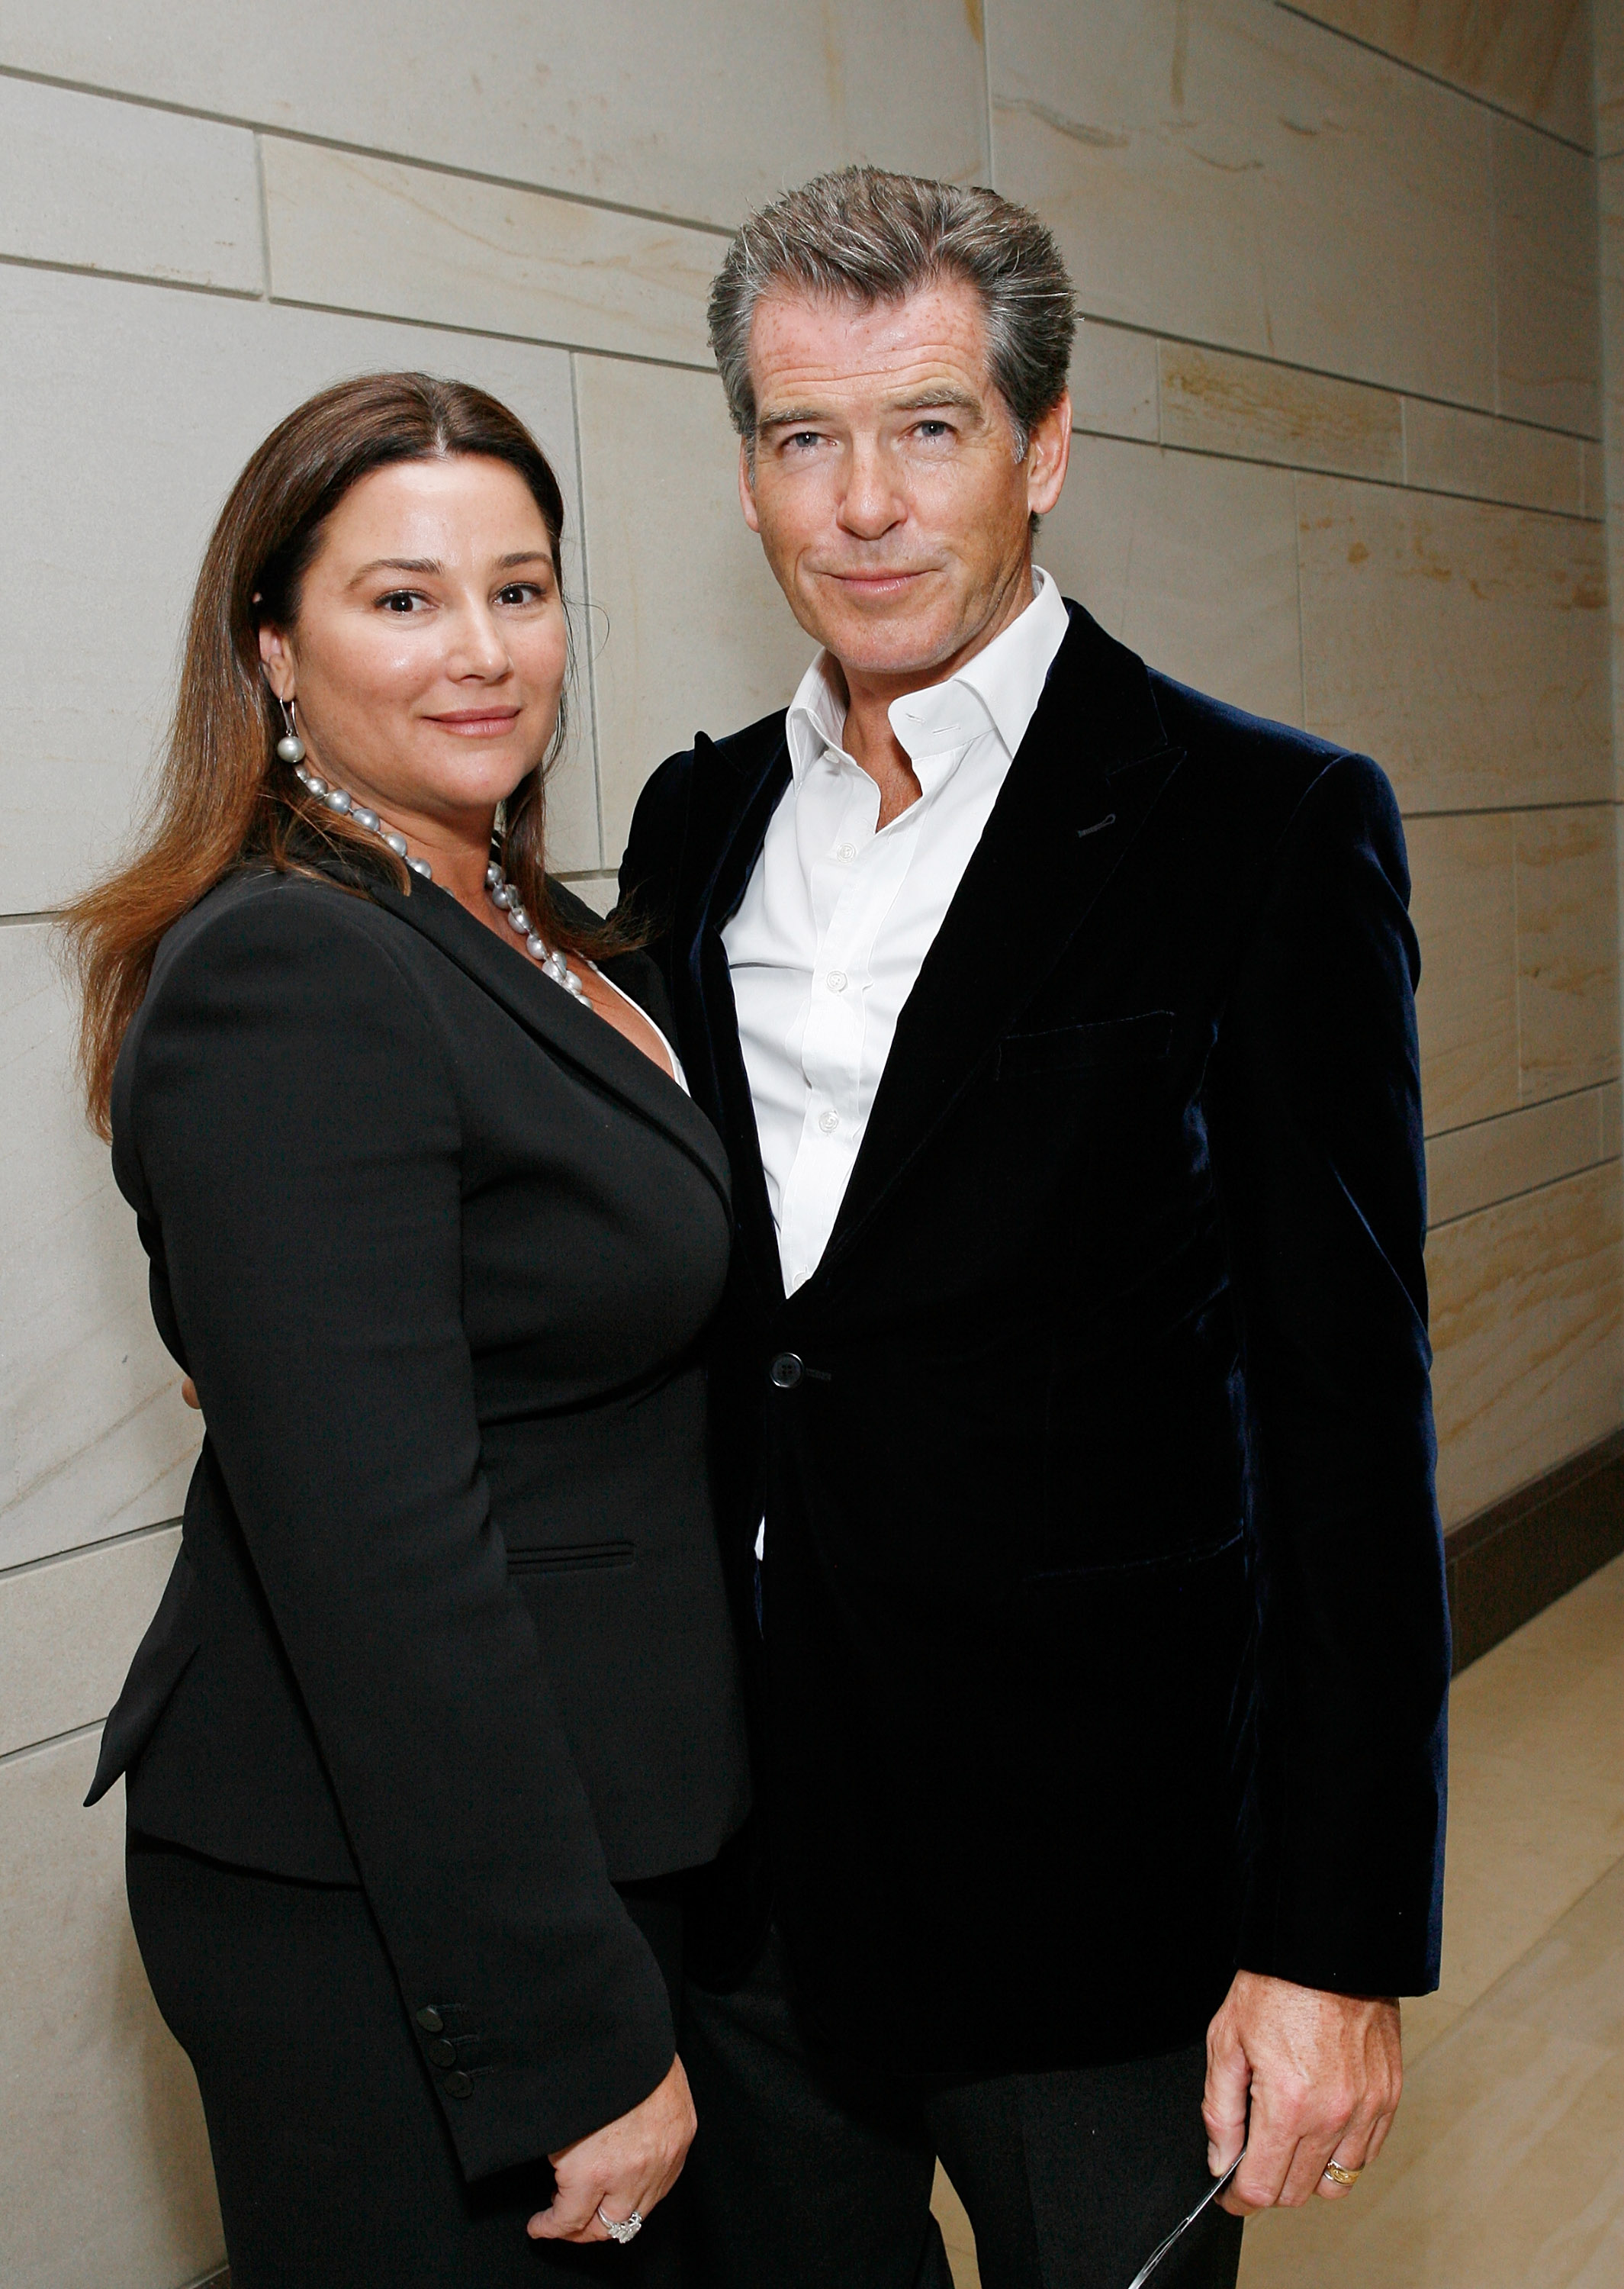 Honorary chairs Keely Brosnan and actor Pierce Brosnan attend the International Fund For Animal Welfare's Global Whale Conservation Congressional Reception at the U.S. Capital Visitor Center Atrium in Washington, D.C., on May 19, 2009.